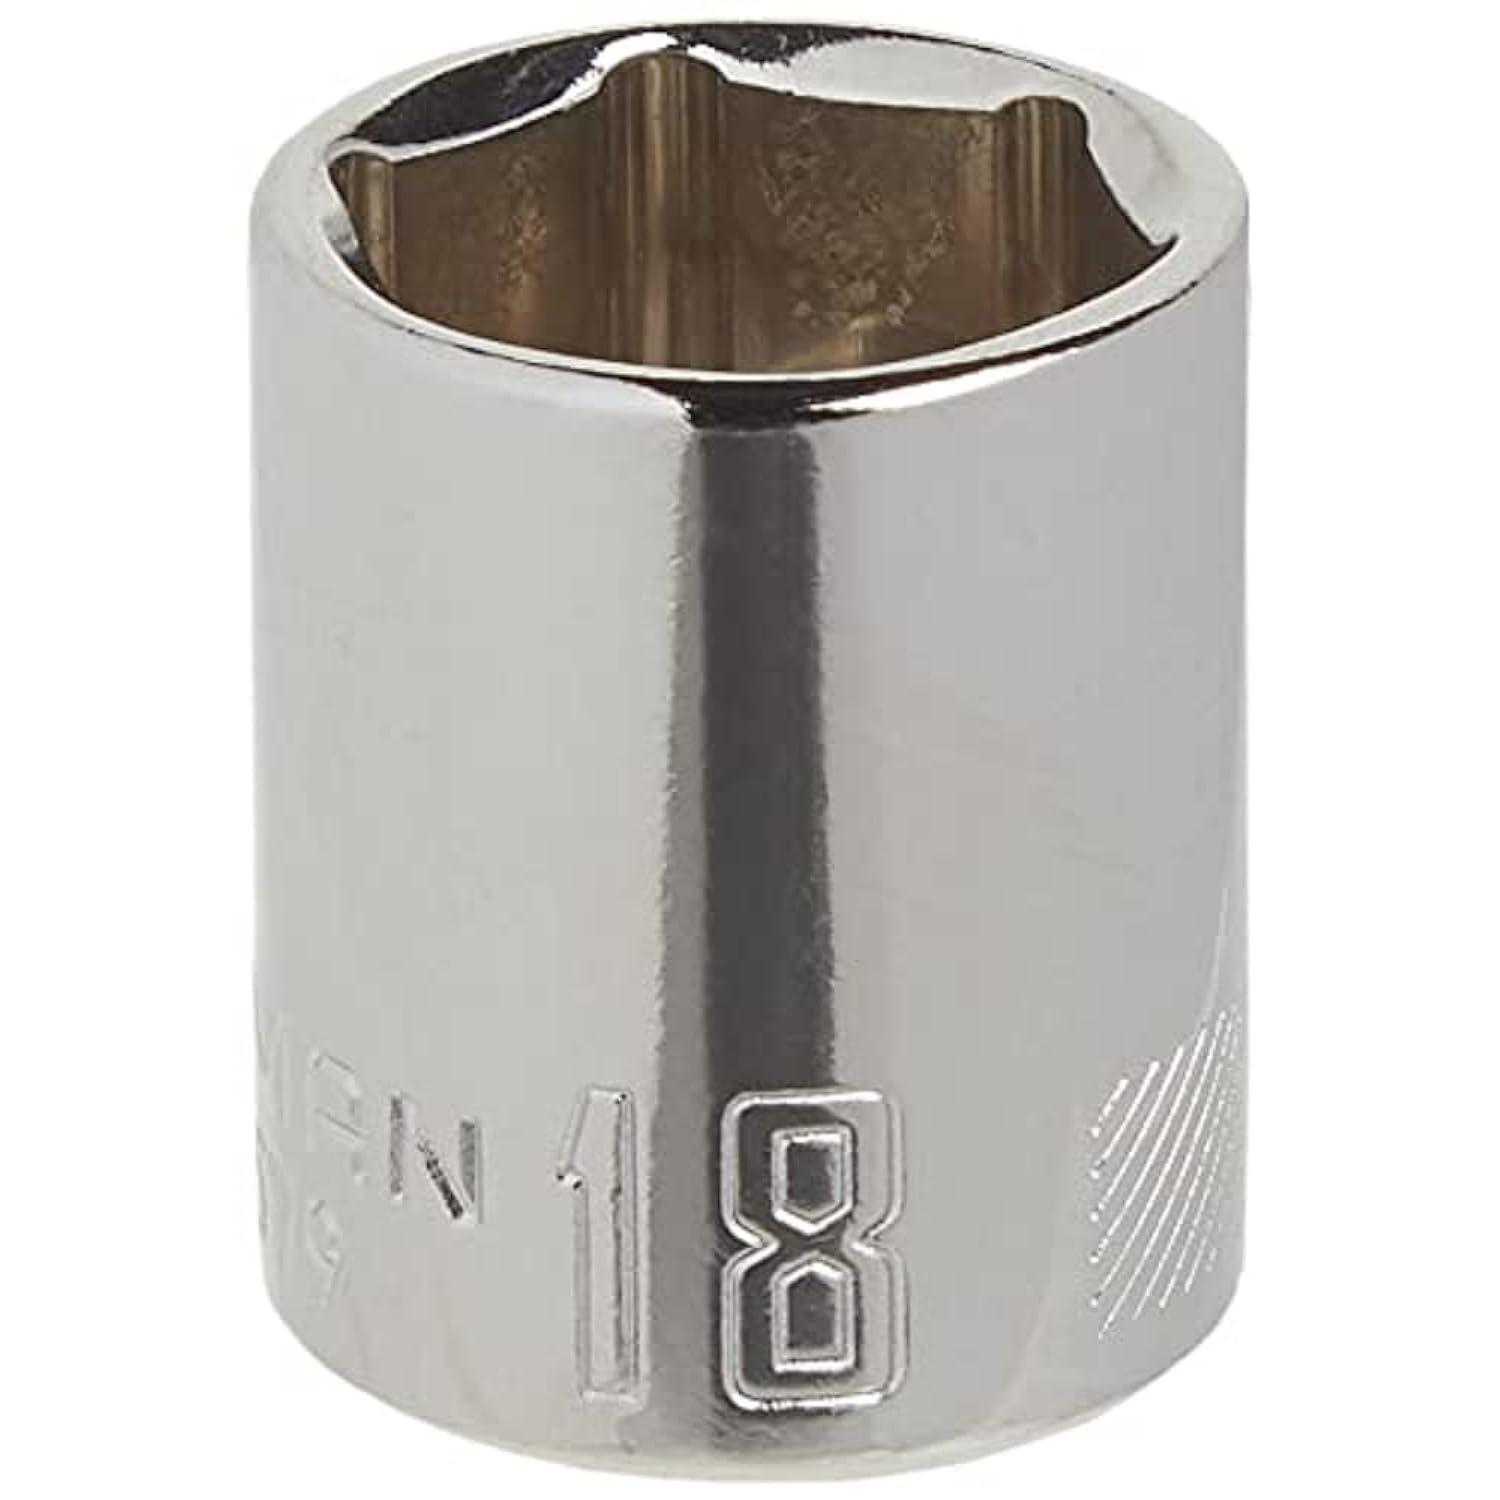 Craftsman Shallow Socket, Metric, 3/8-Inch Drive, 18mm, 6-Point (CMMT43579)